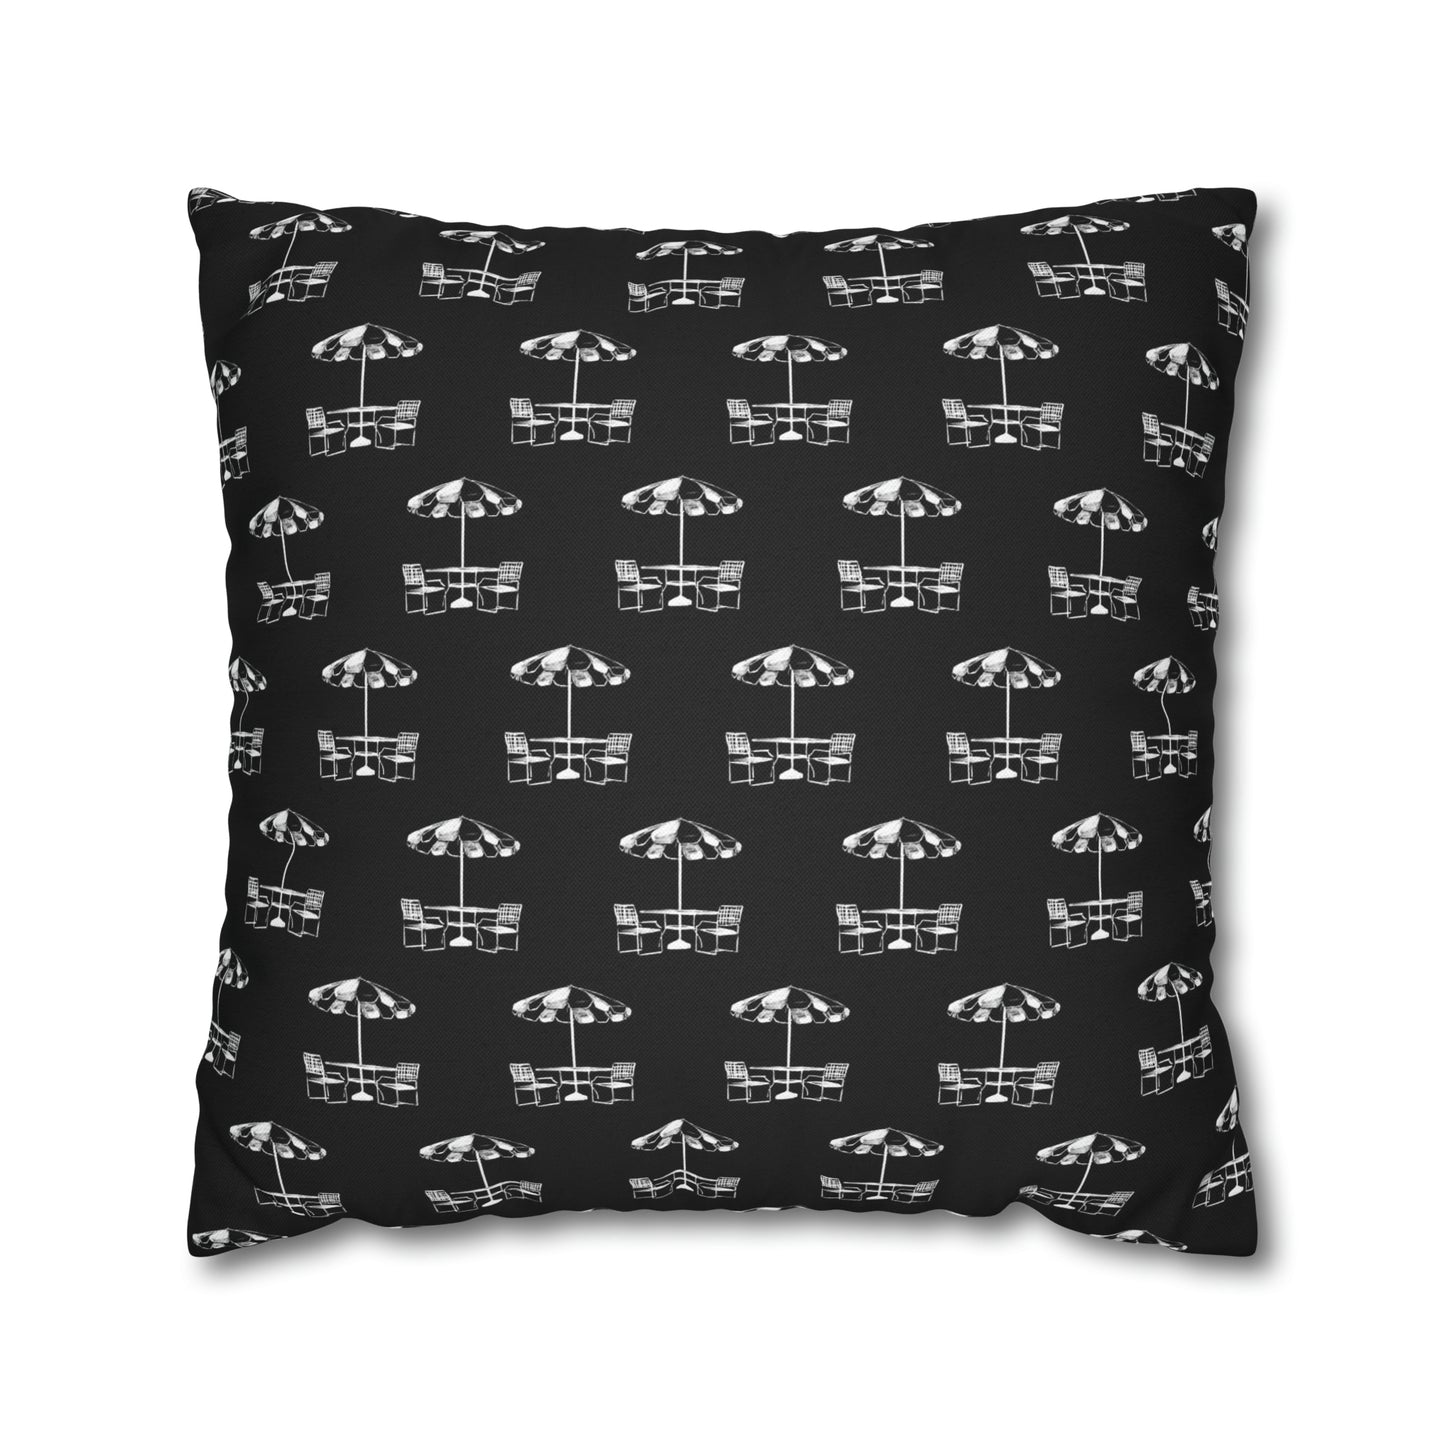 Black and White Pillow Case Only